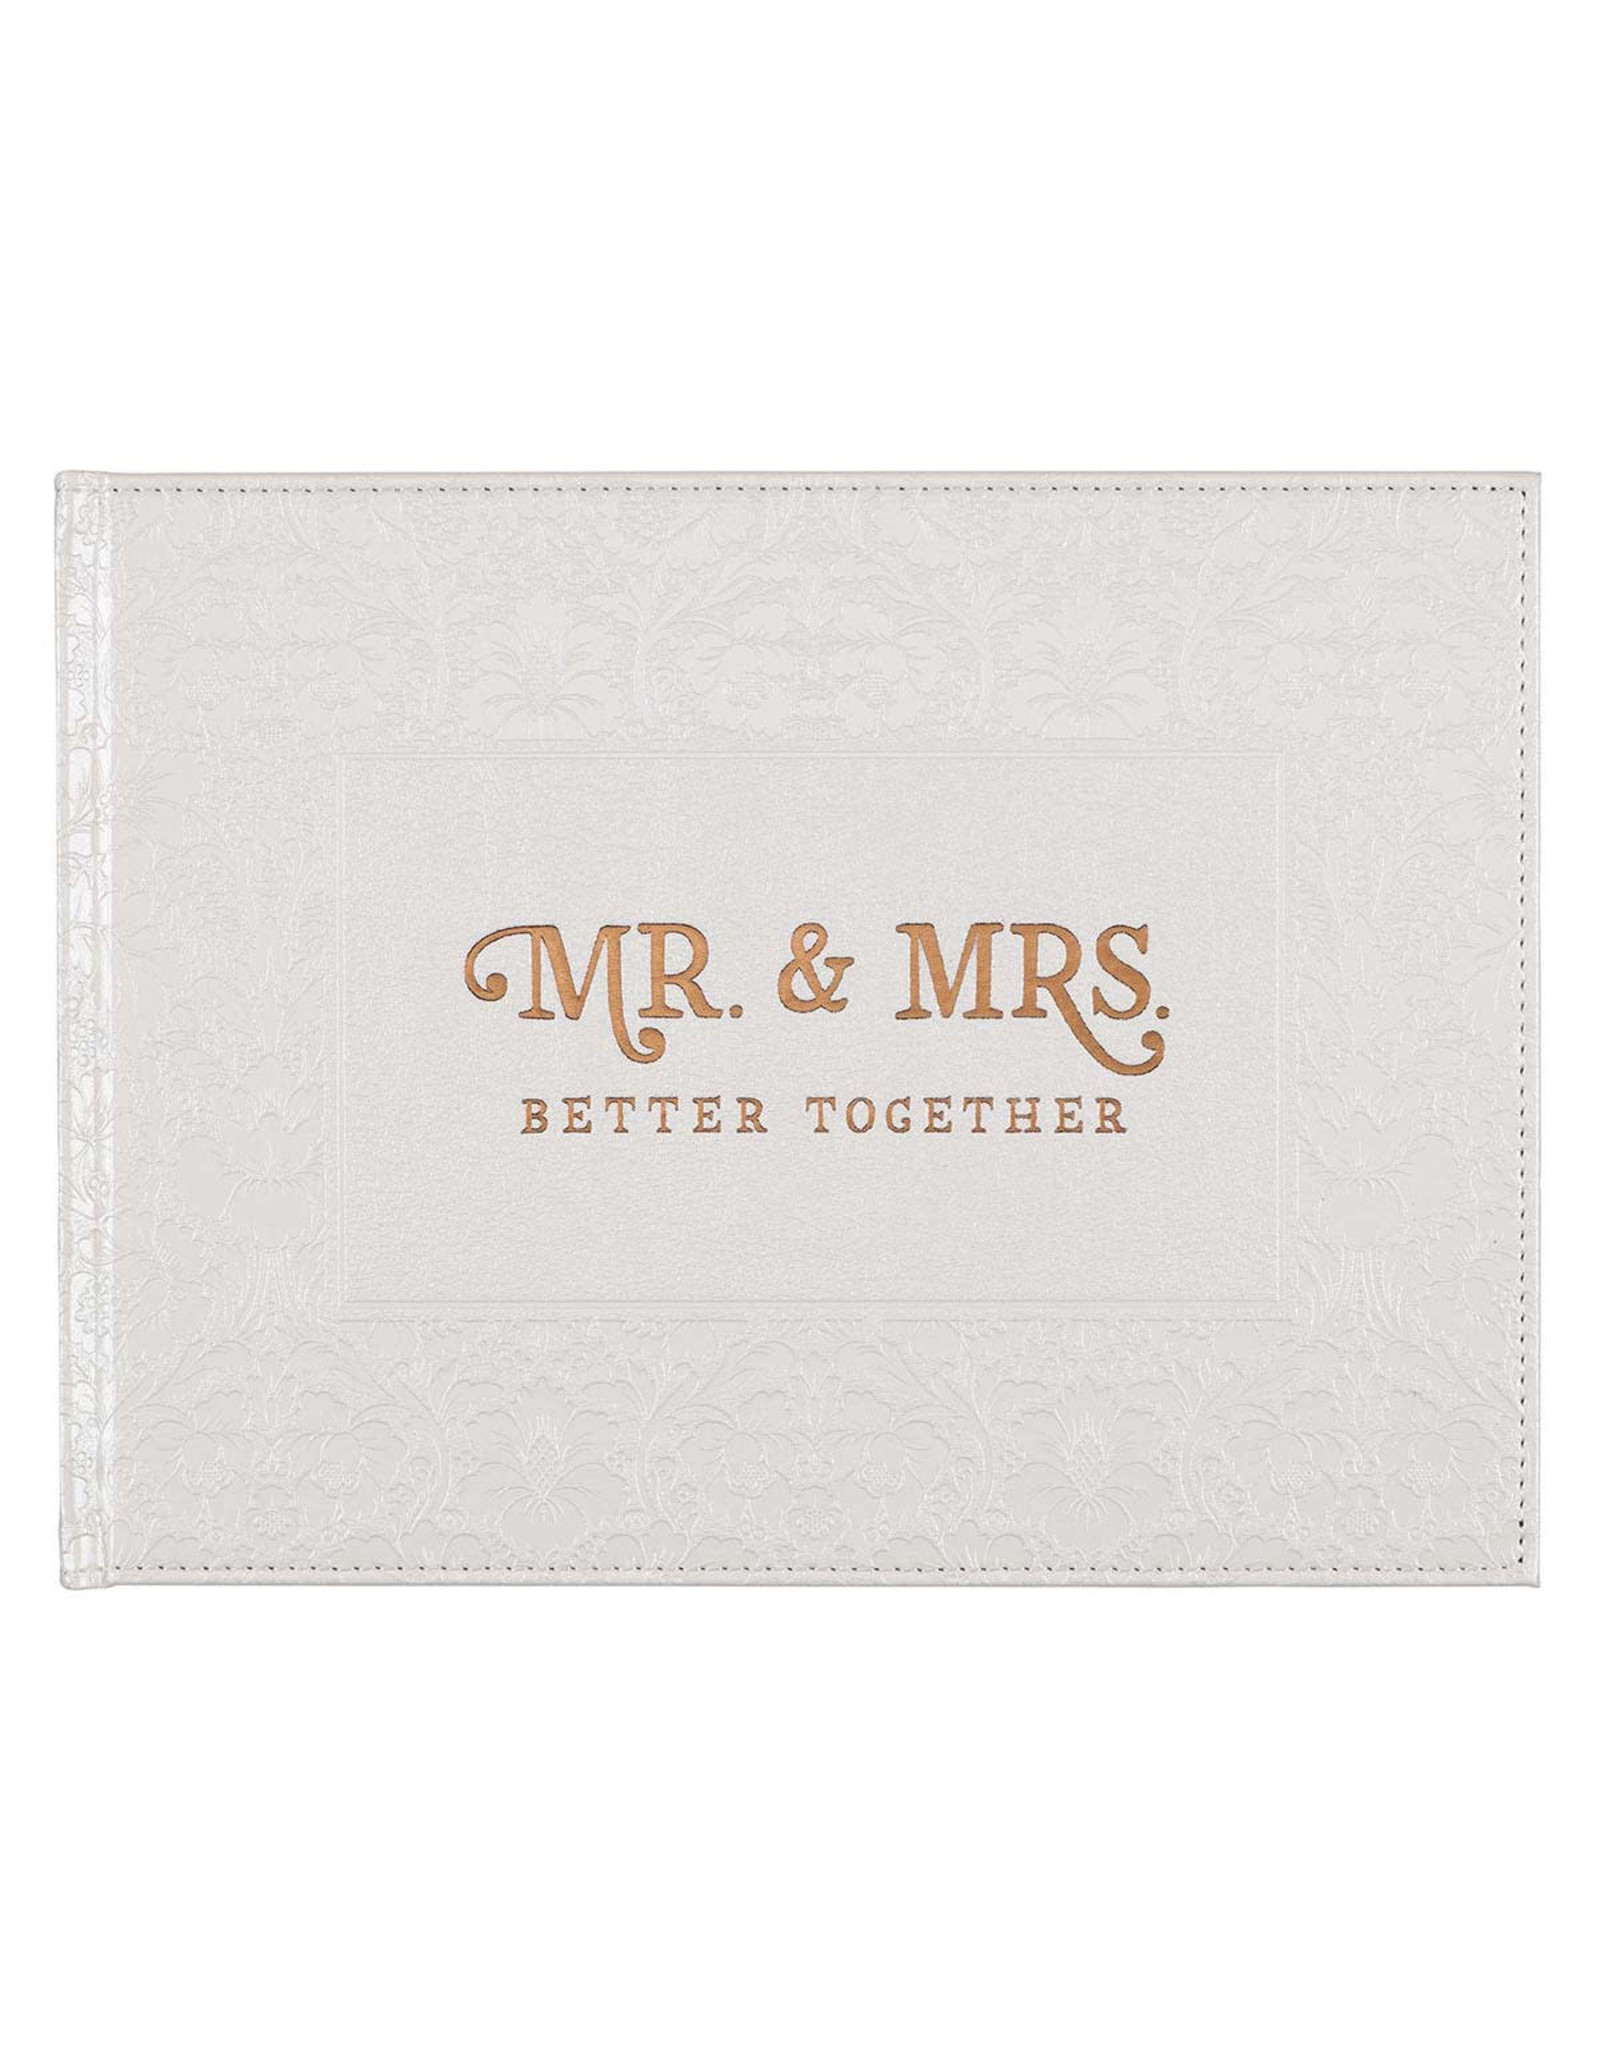 Christian Art Gifts Guest Book - Wedding - Mr. & Mrs., Medium White Faux Leather